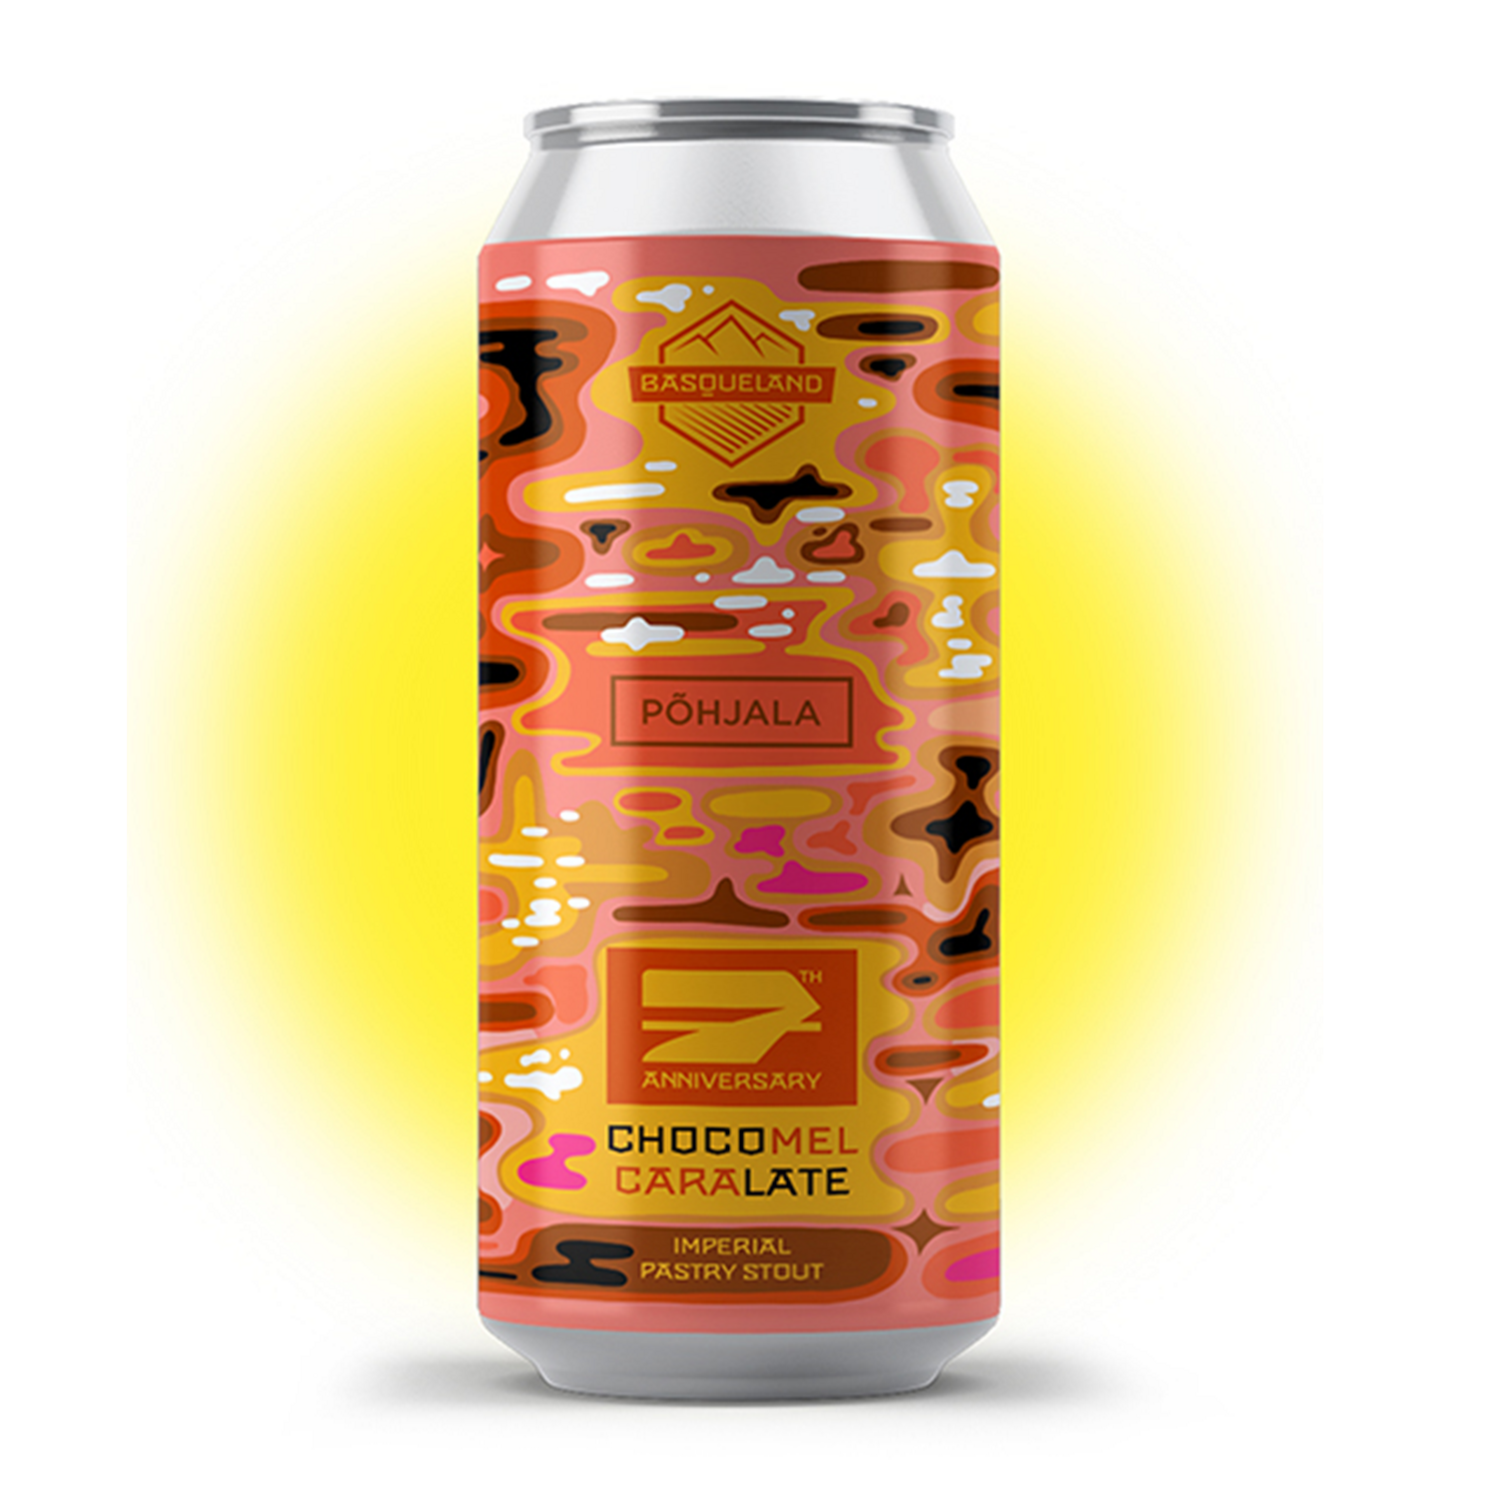 Basqueland x Pohjala Chocomel Caralate Imperial Pastry Stout